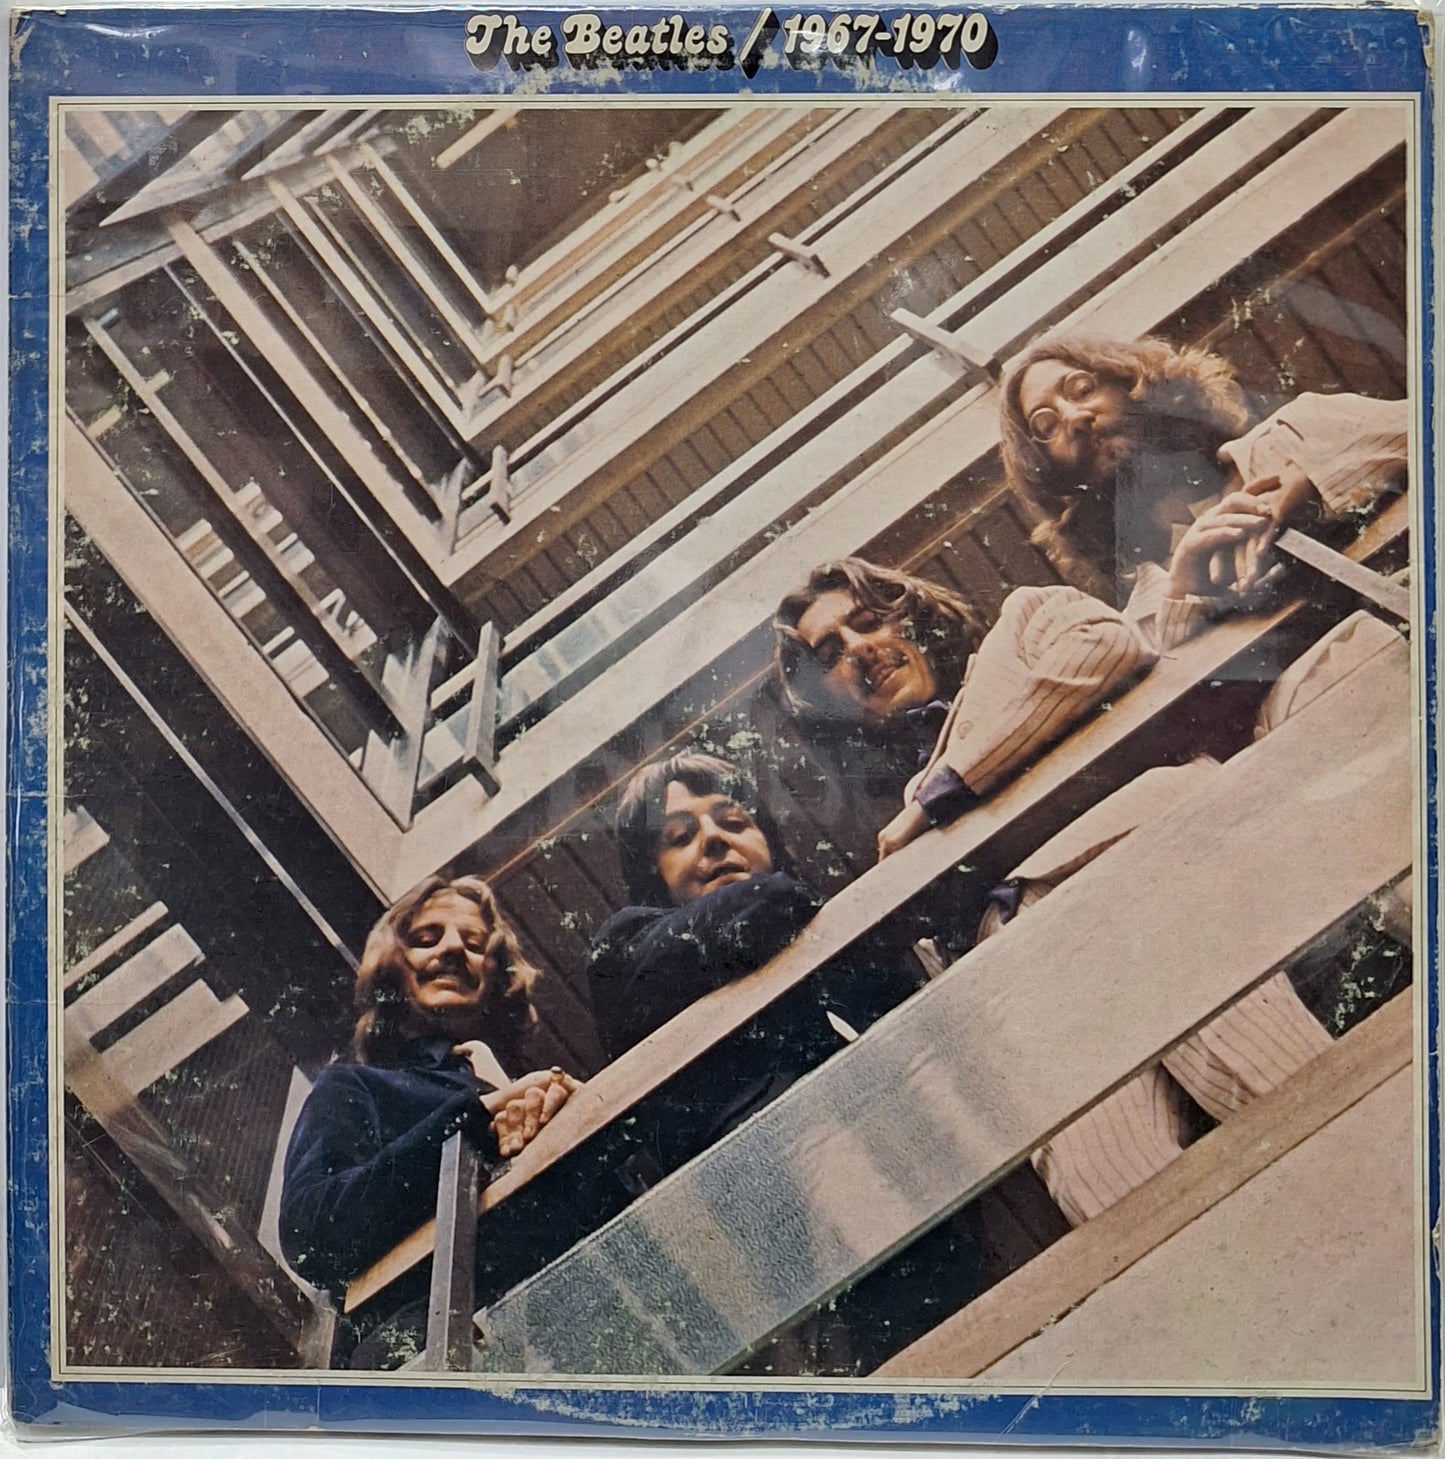 THE BEATLES - 1967 1970  2 LPS